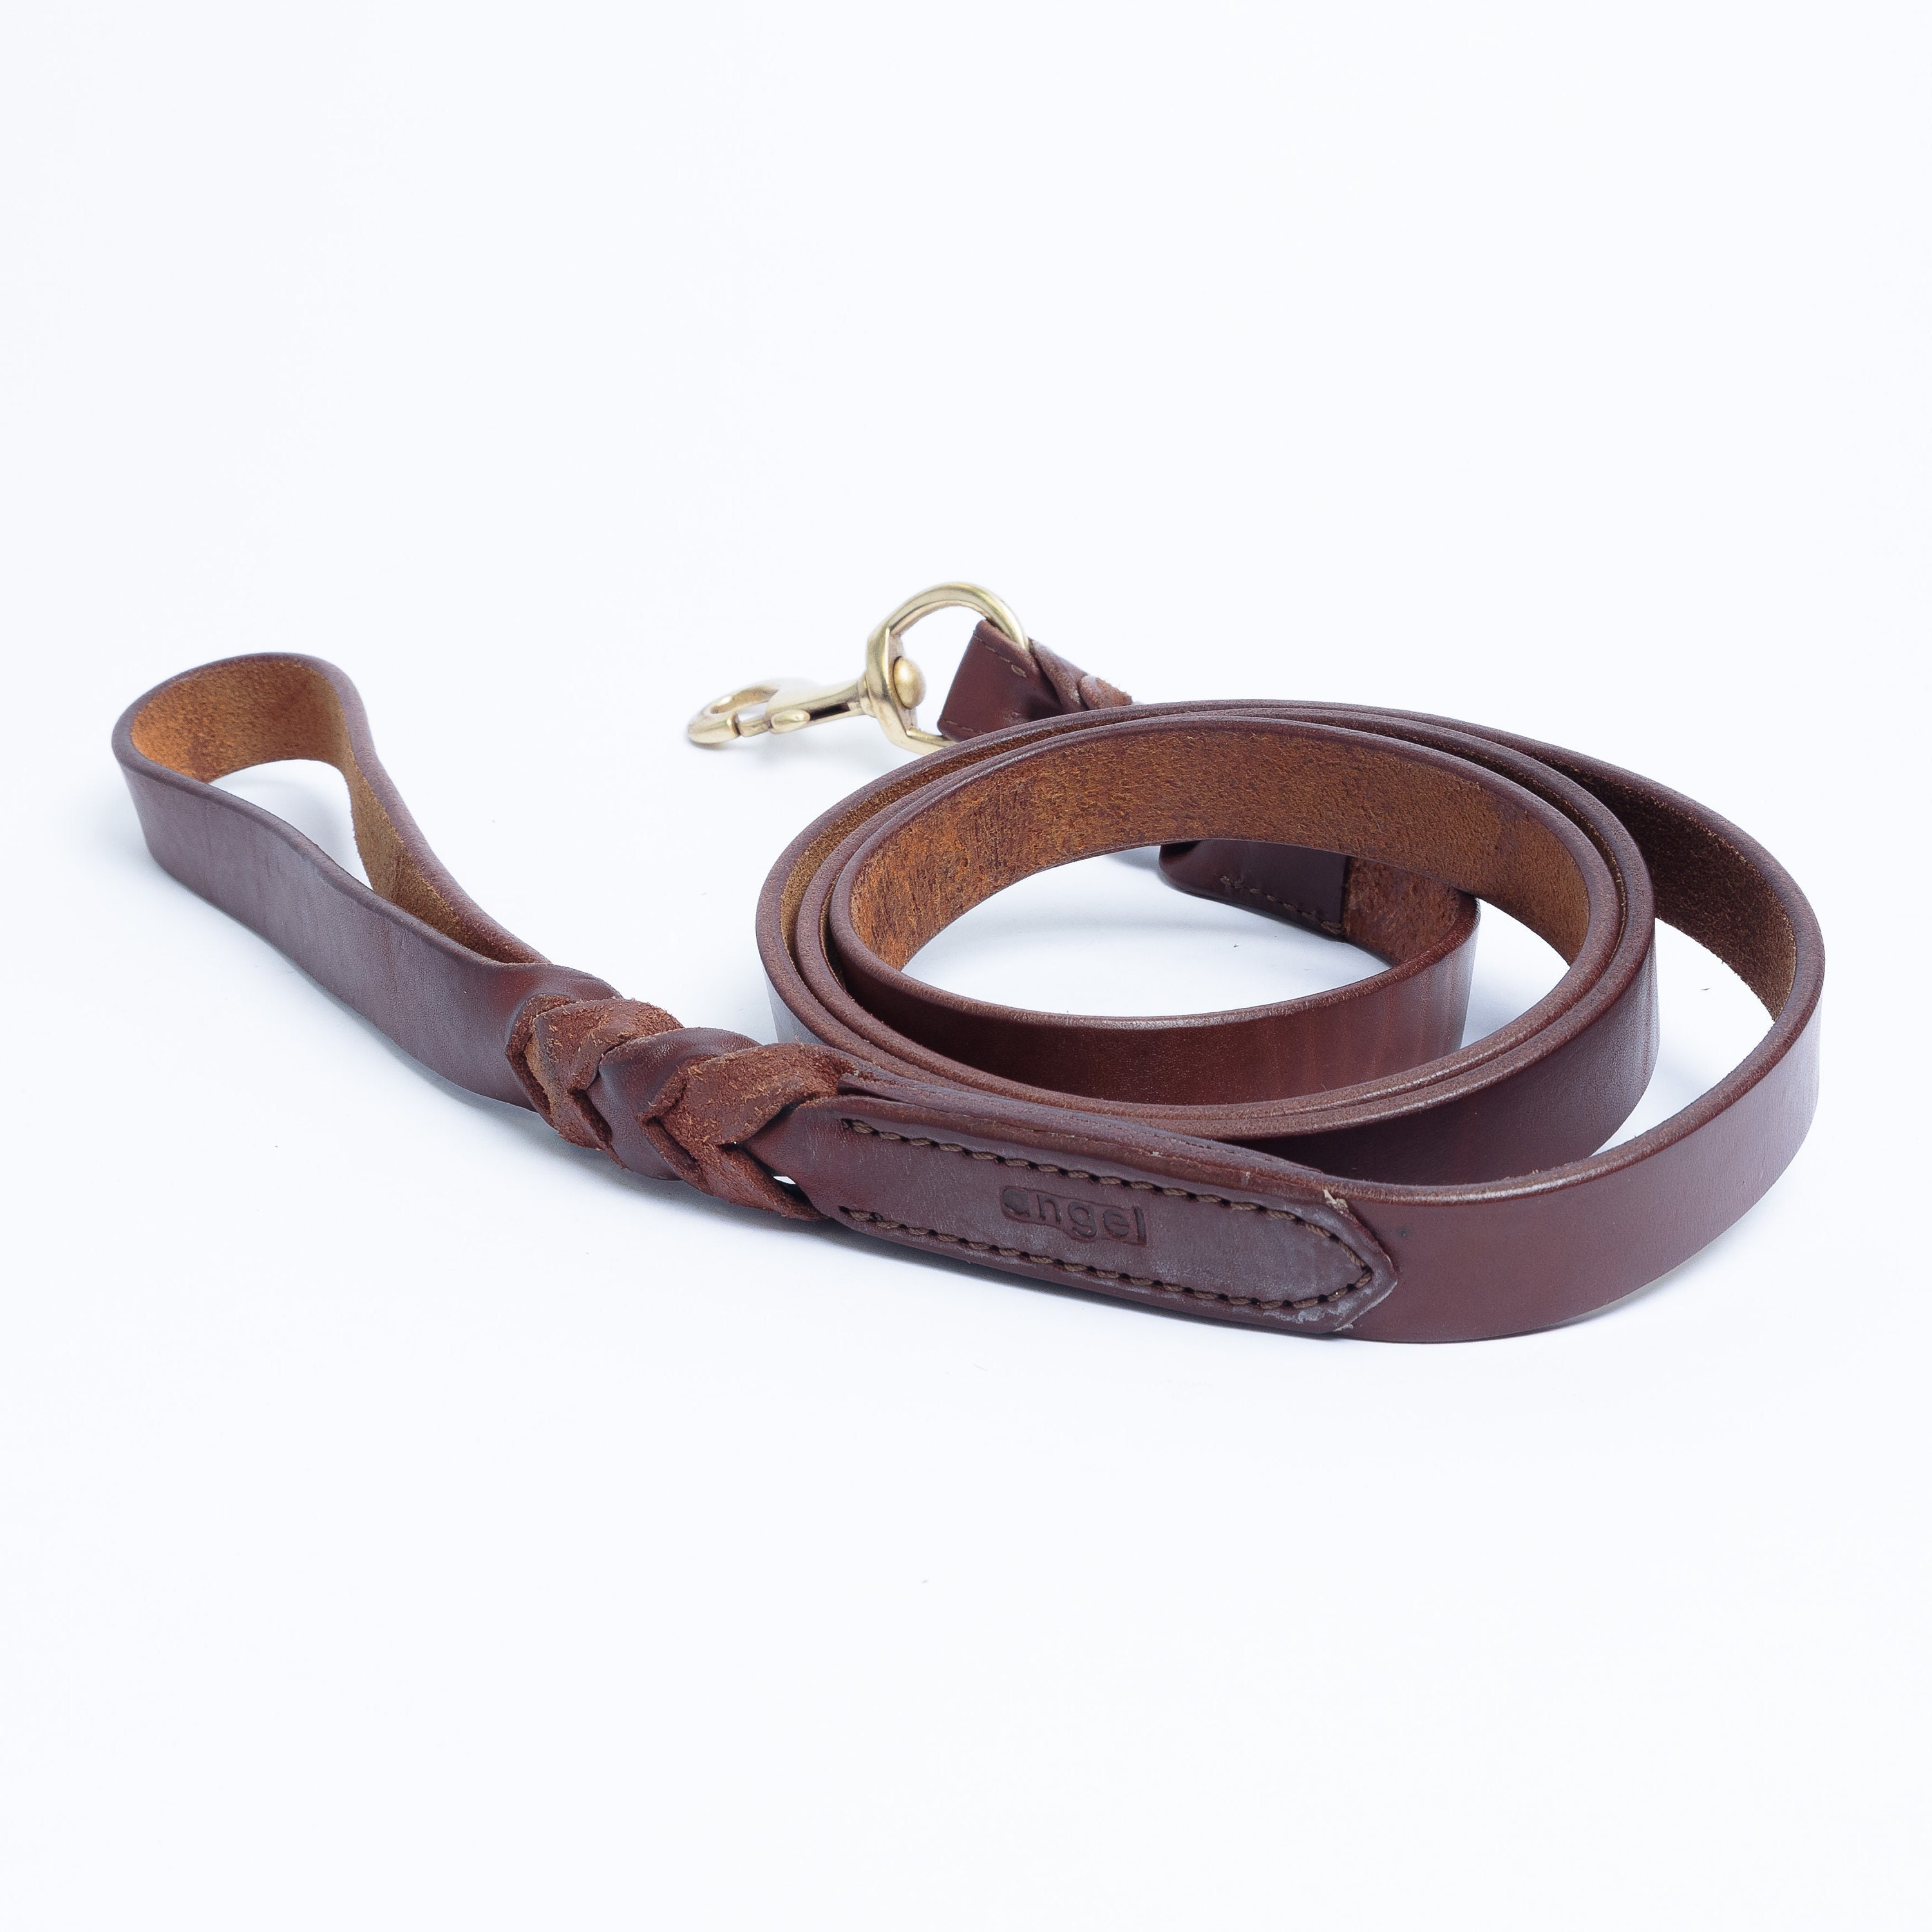 Fairwin Leather Dog Leash 6 Foot - Braided Heavy Duty Training Leash for  Large Medium Small Dogs Running and Walking (M:Width:5/8, Brown) :  : Pet Supplies